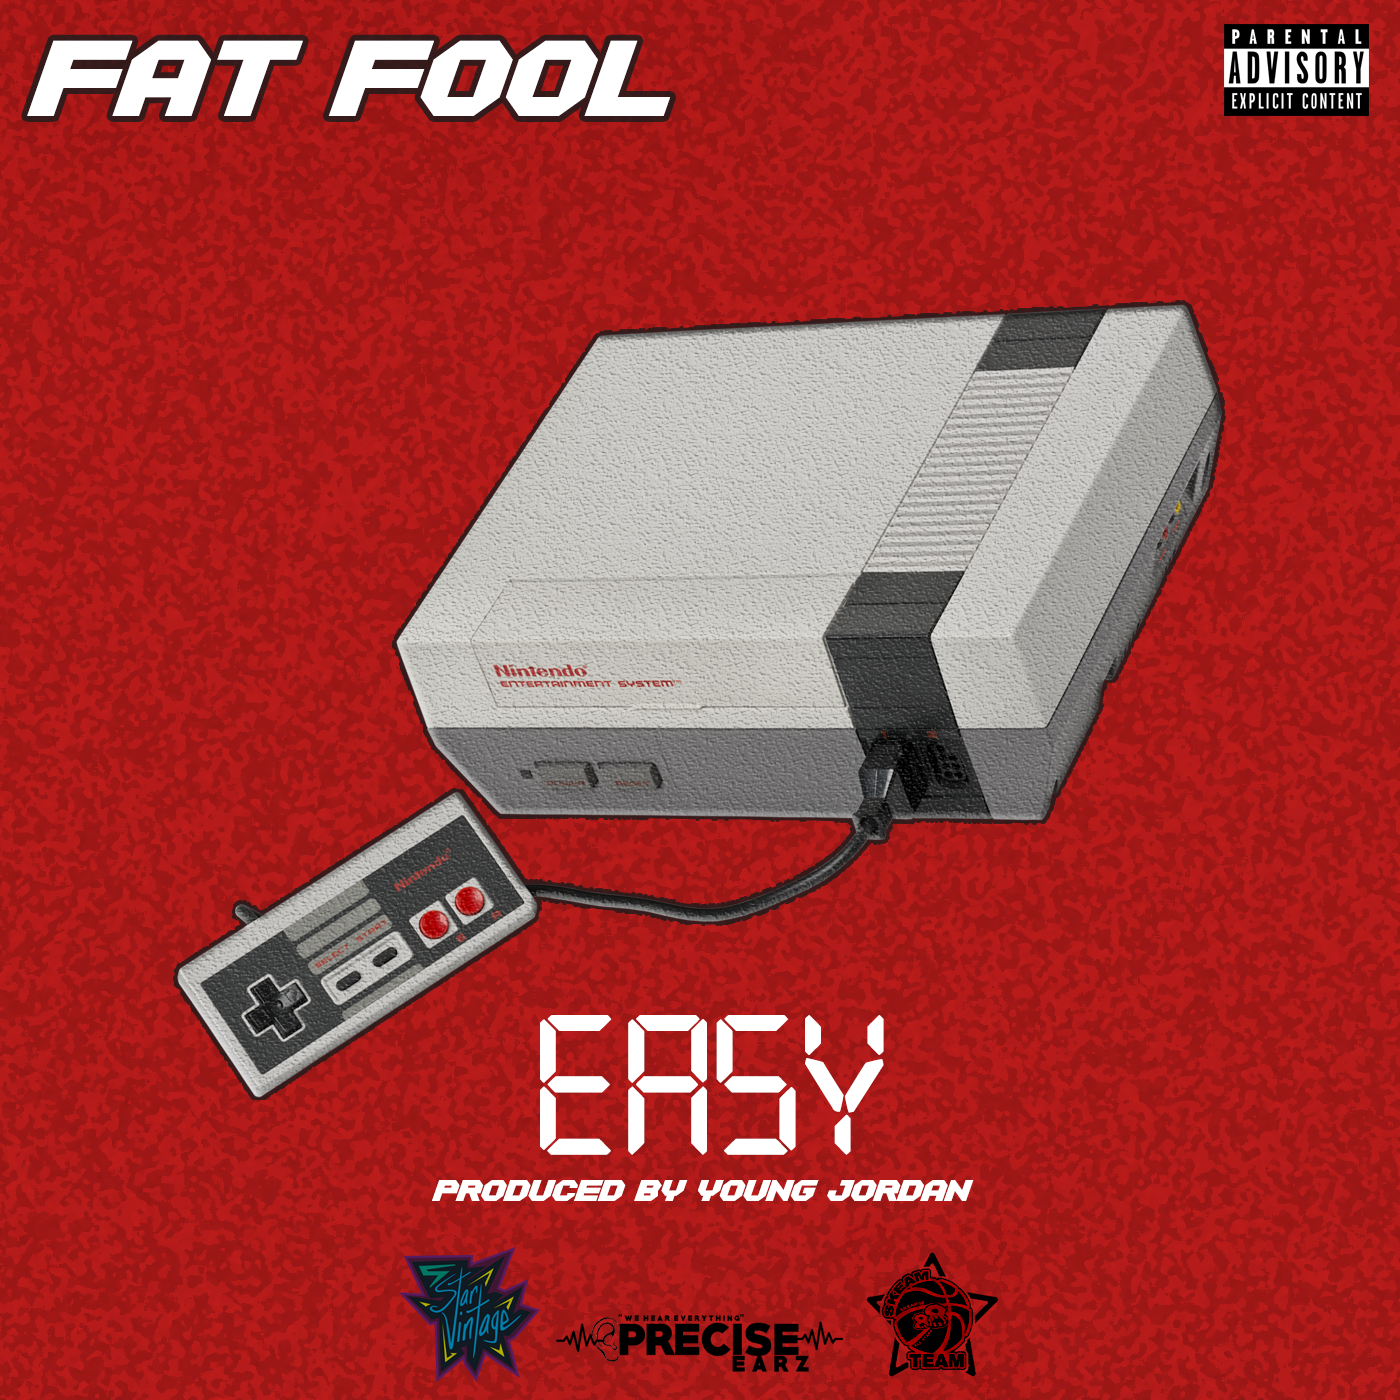 Orlando’s Fat Fool Gets Gully On “Easy” Record